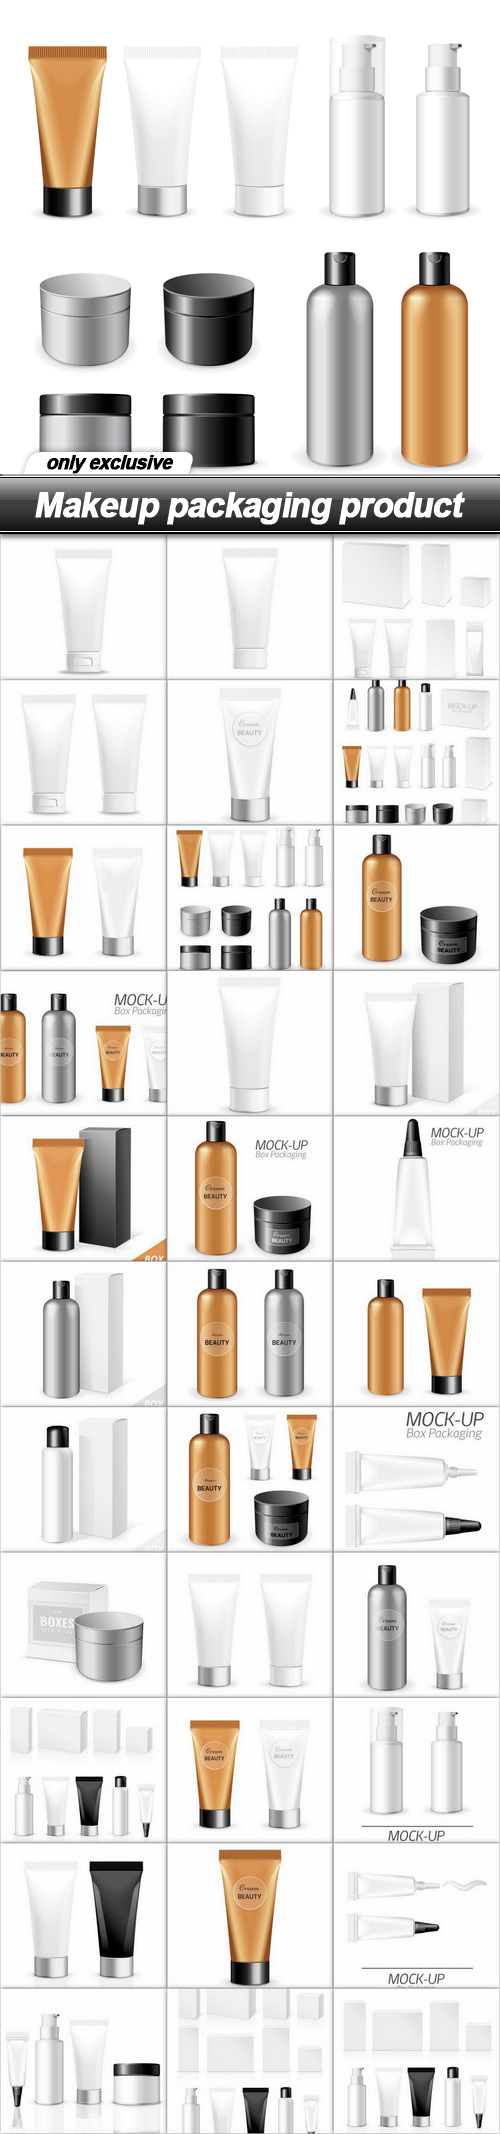 Makeup packaging product - 33 EPS